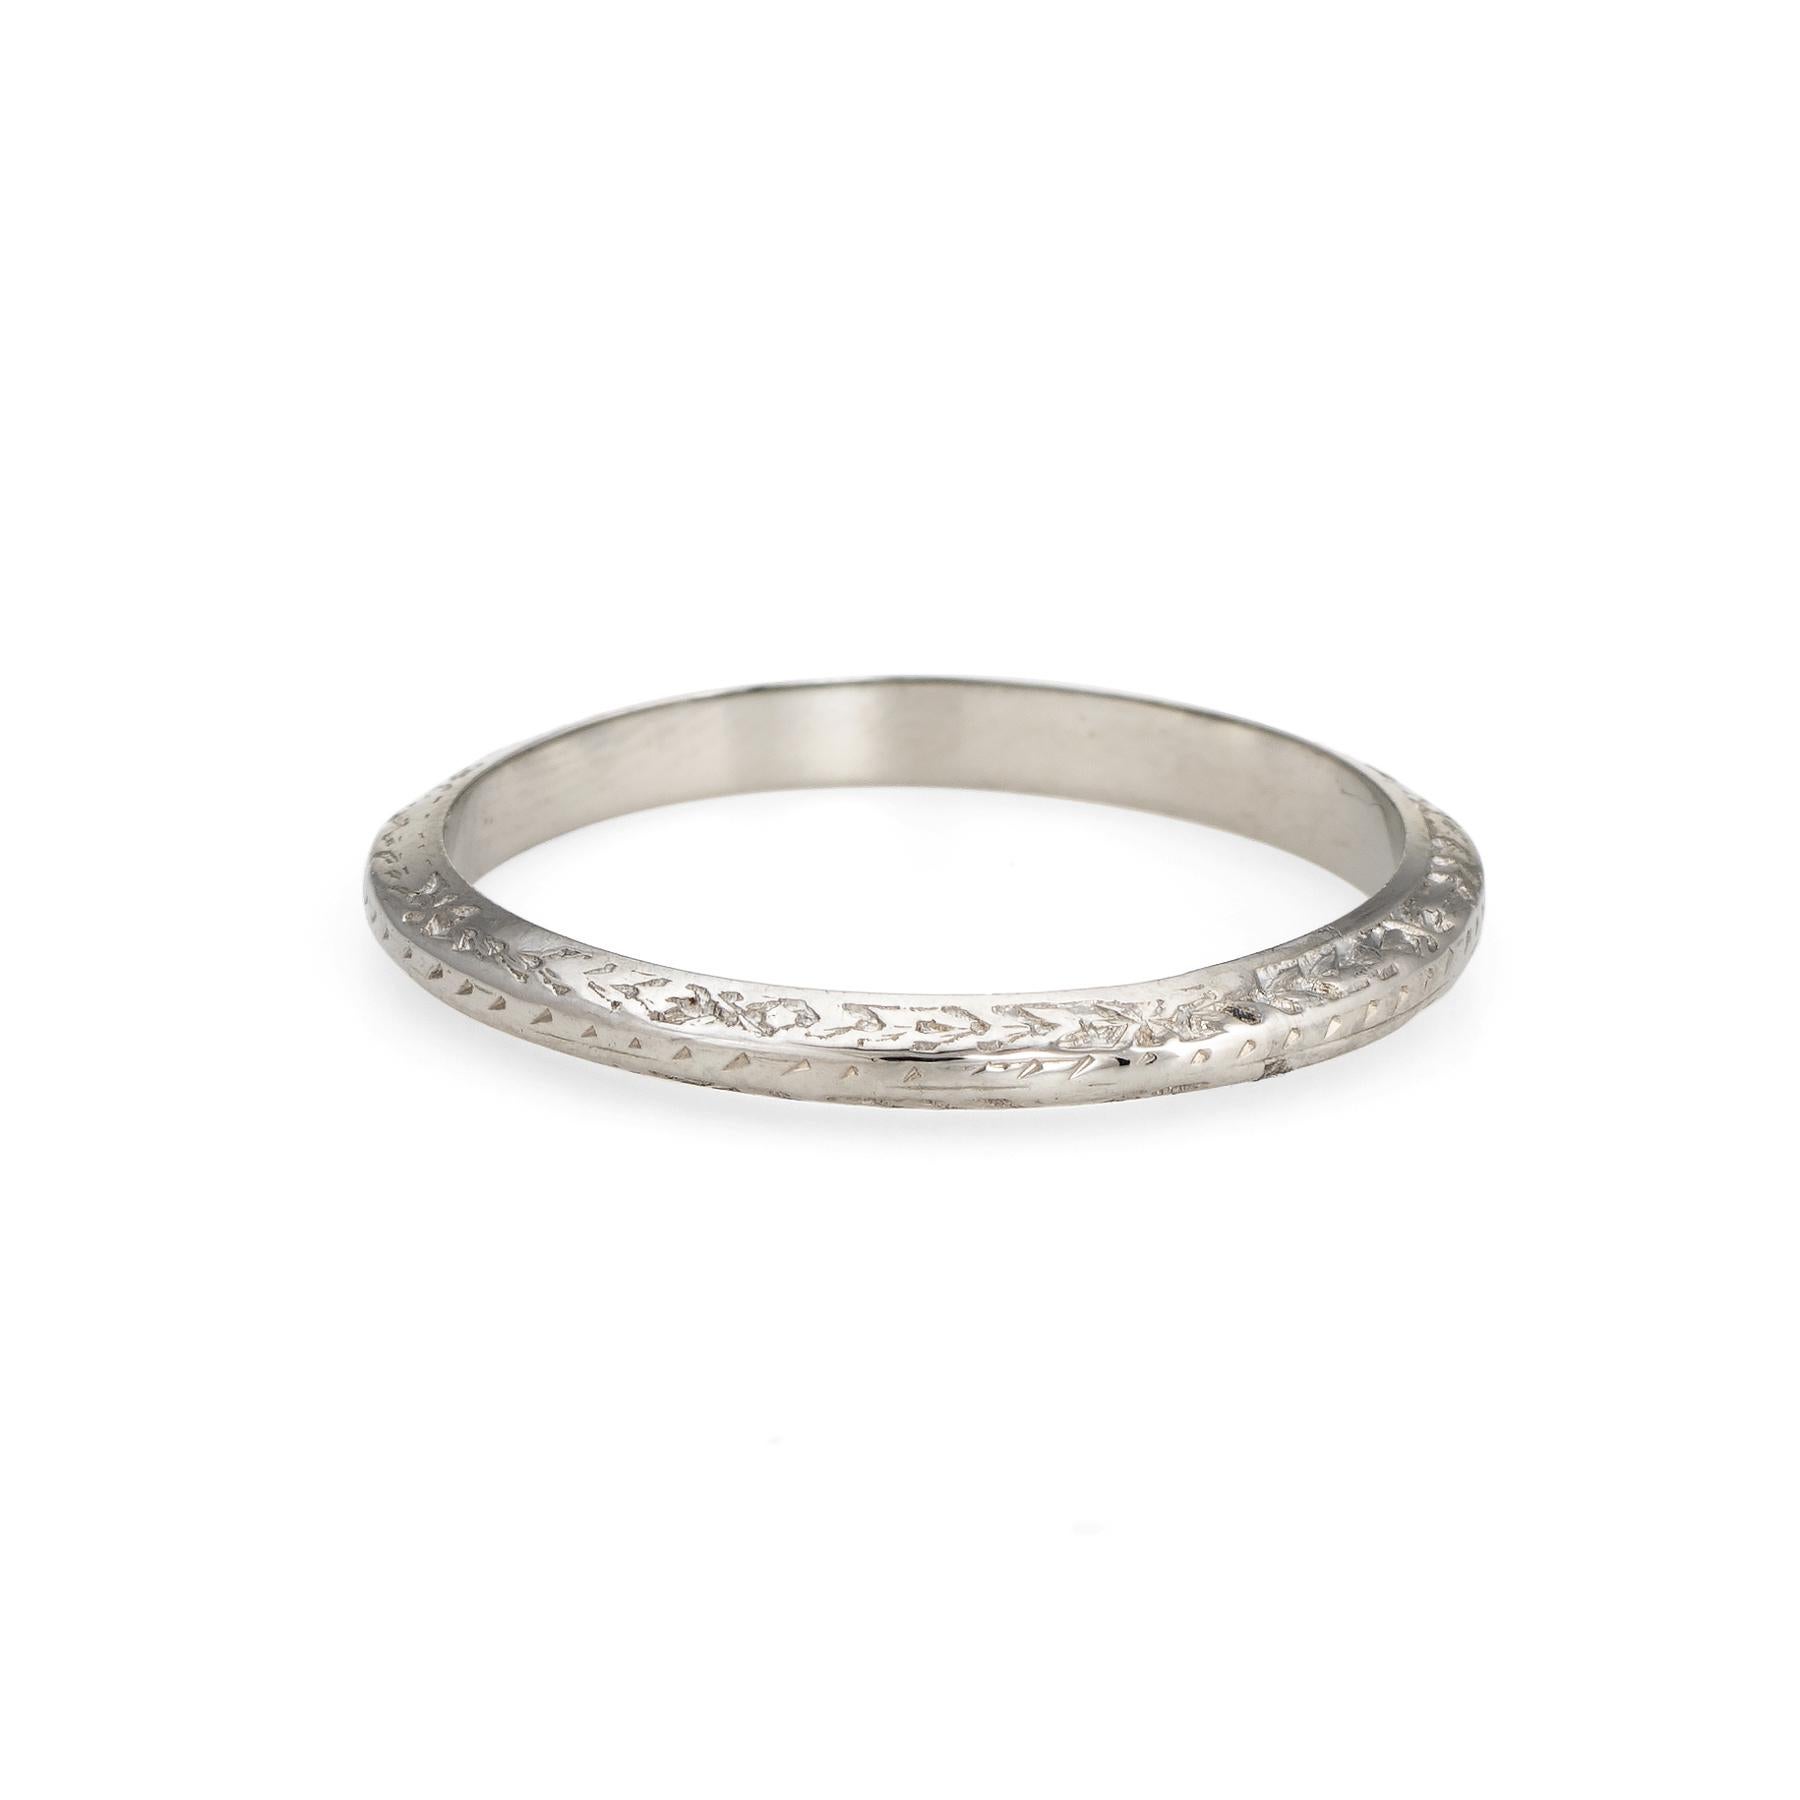 Finely detailed vintage Art Deco era band (circa 1920s to 1930s), crafted in 18 karat white gold. 

Charming foliate and floral embossed pattern is evident around the entire band. 

The stylish band would compliment a variety of engagement rings